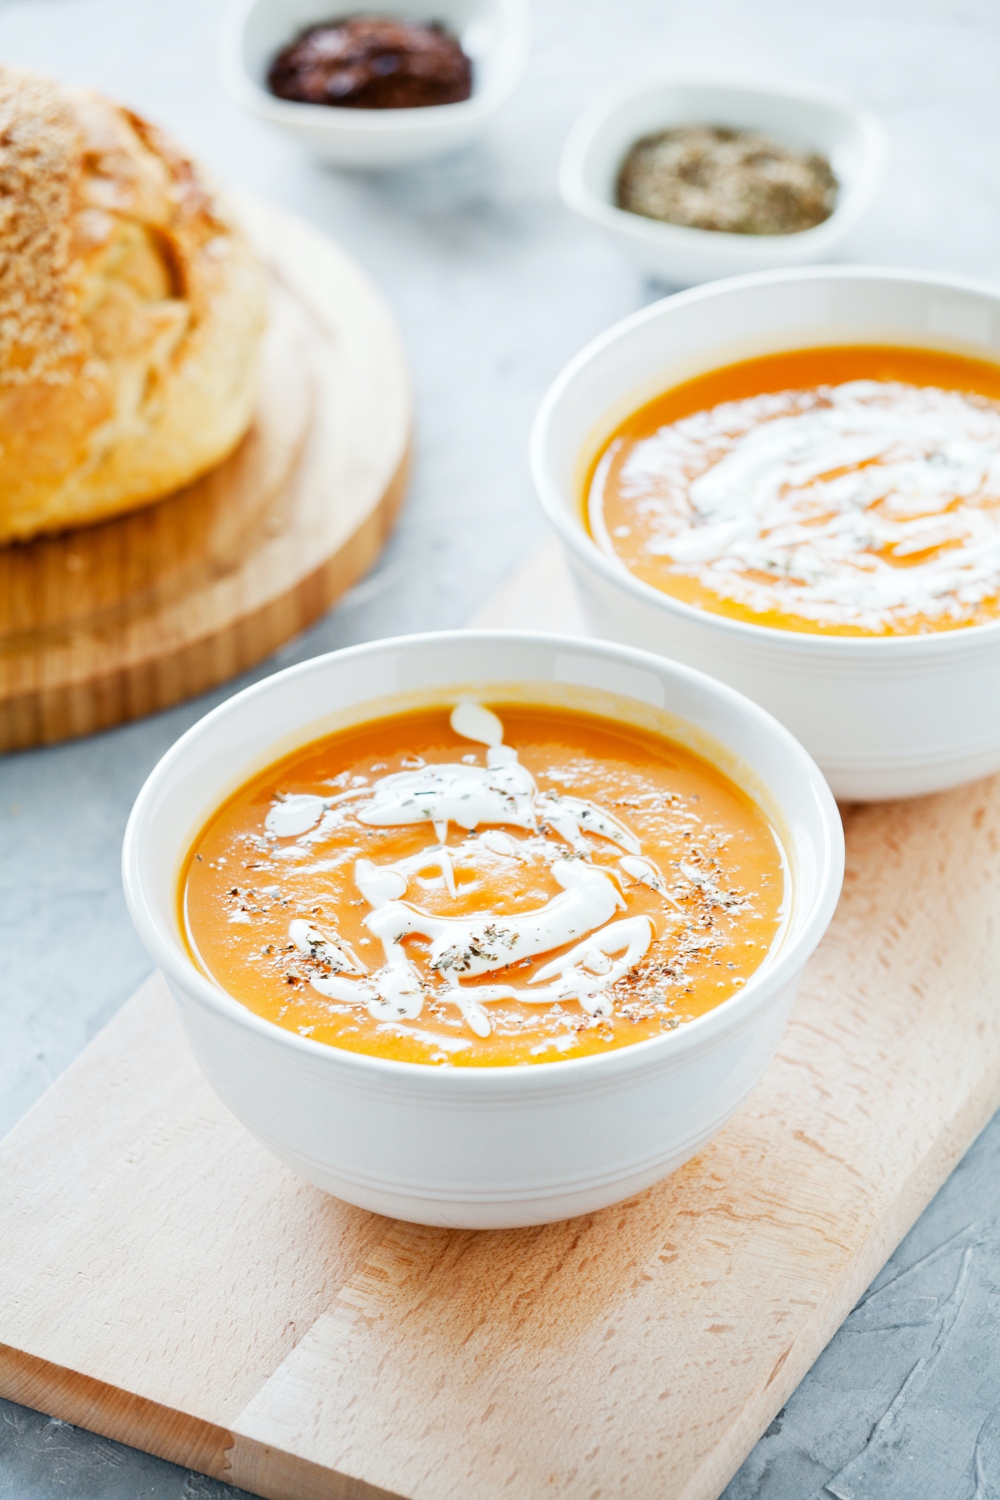 Curried Butternut Squash & Pear Soup | 12 Tomatoes